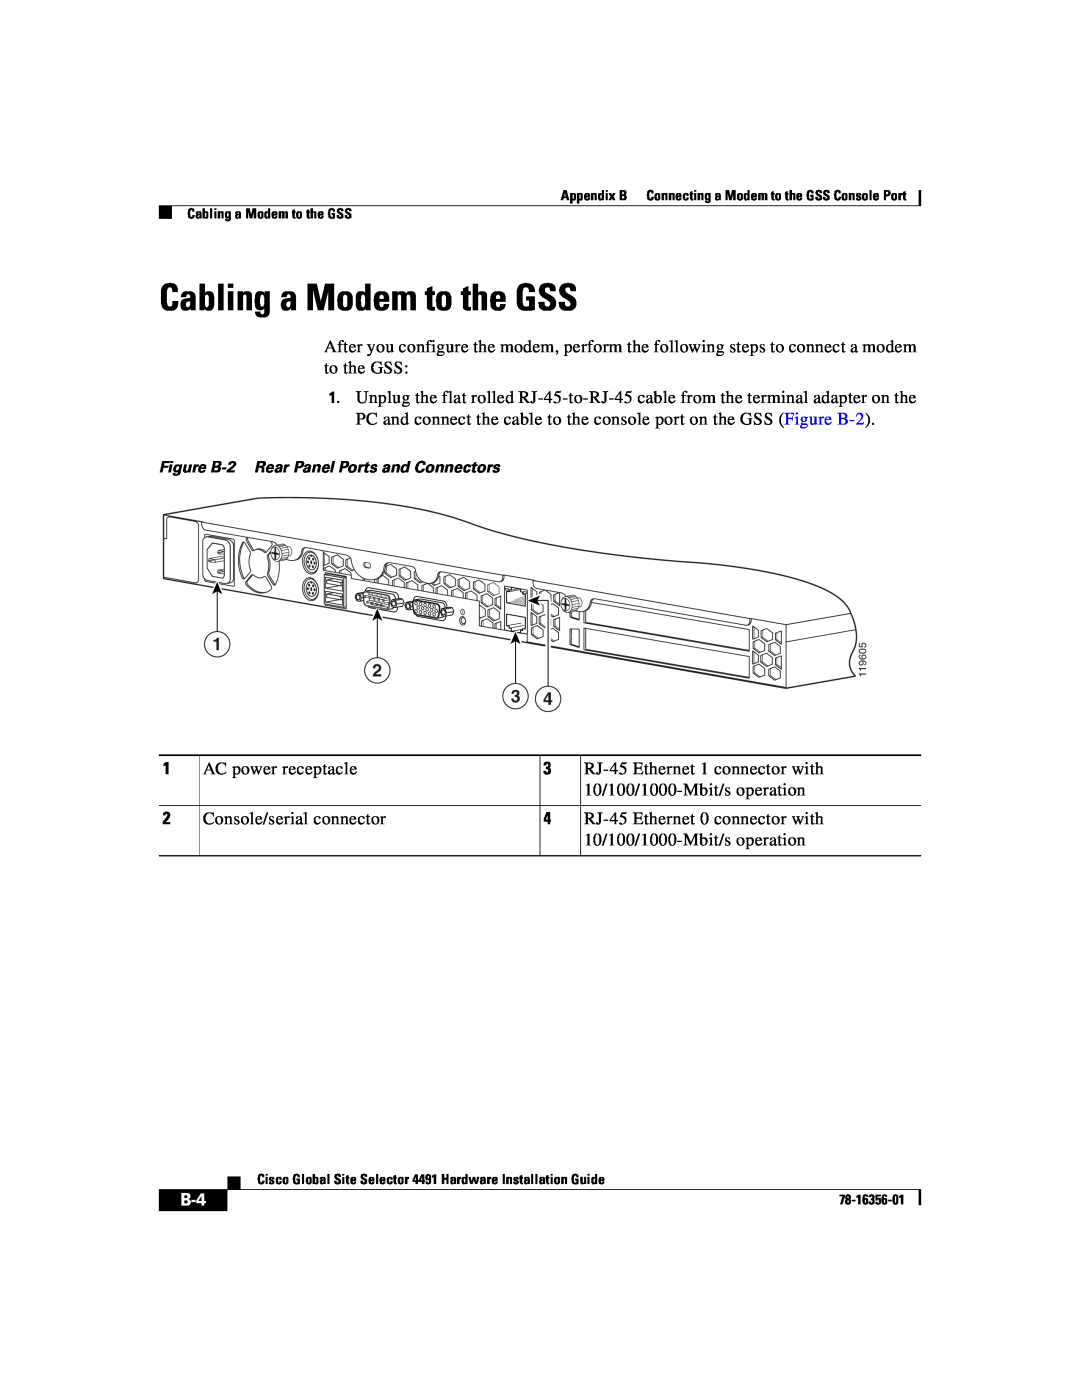 Cisco Systems 78-16356-01 manual Cabling a Modem to the GSS 